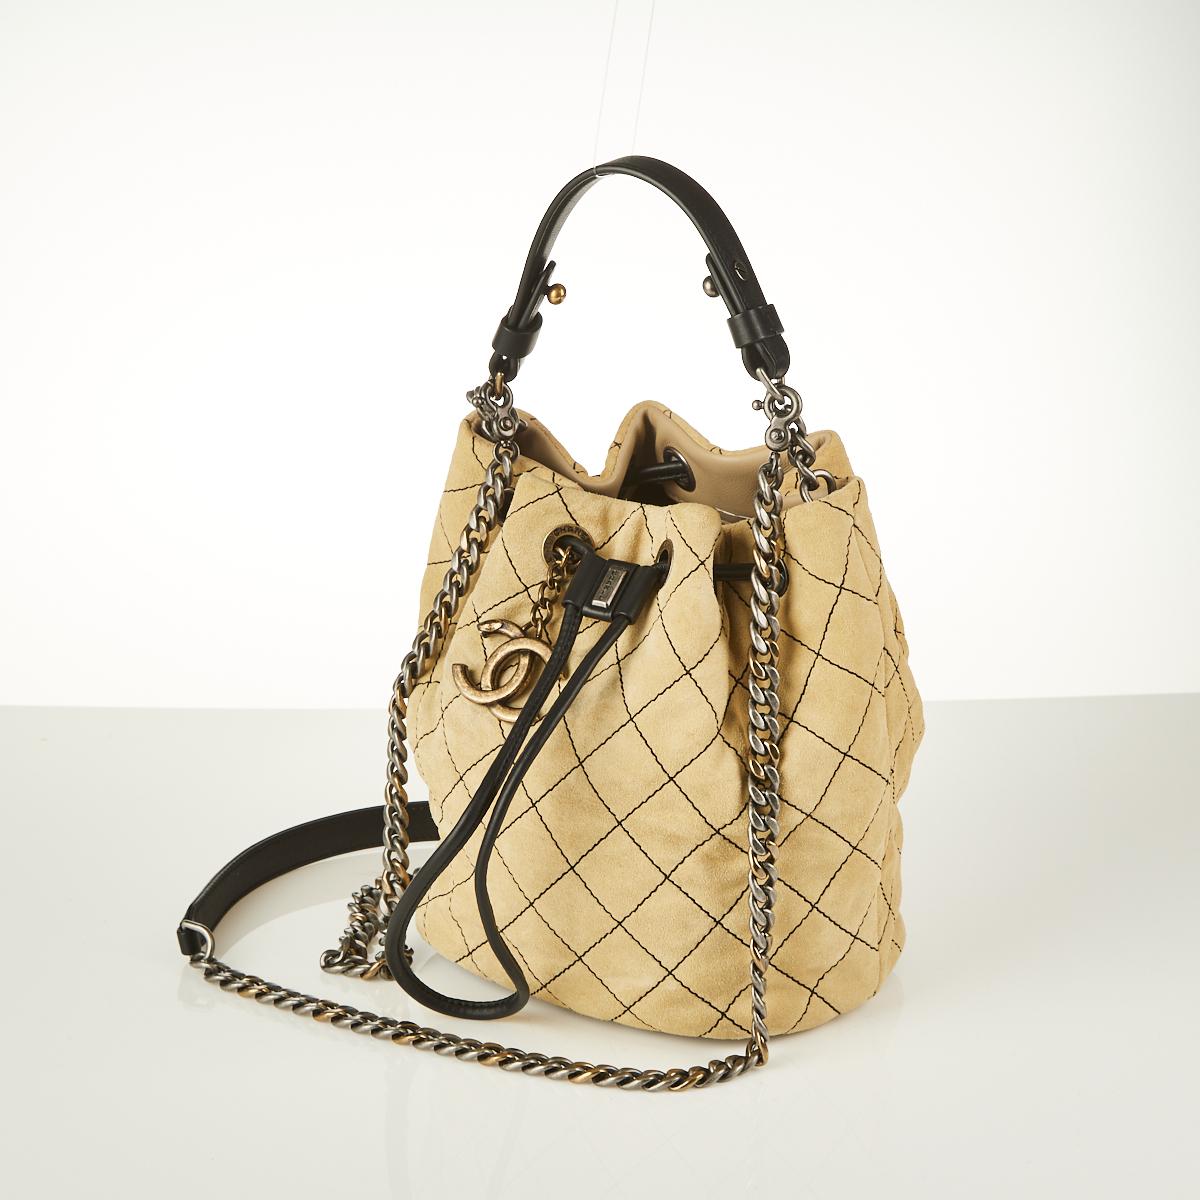 Sold at Auction: Chanel 'Wild Stitch' Tote